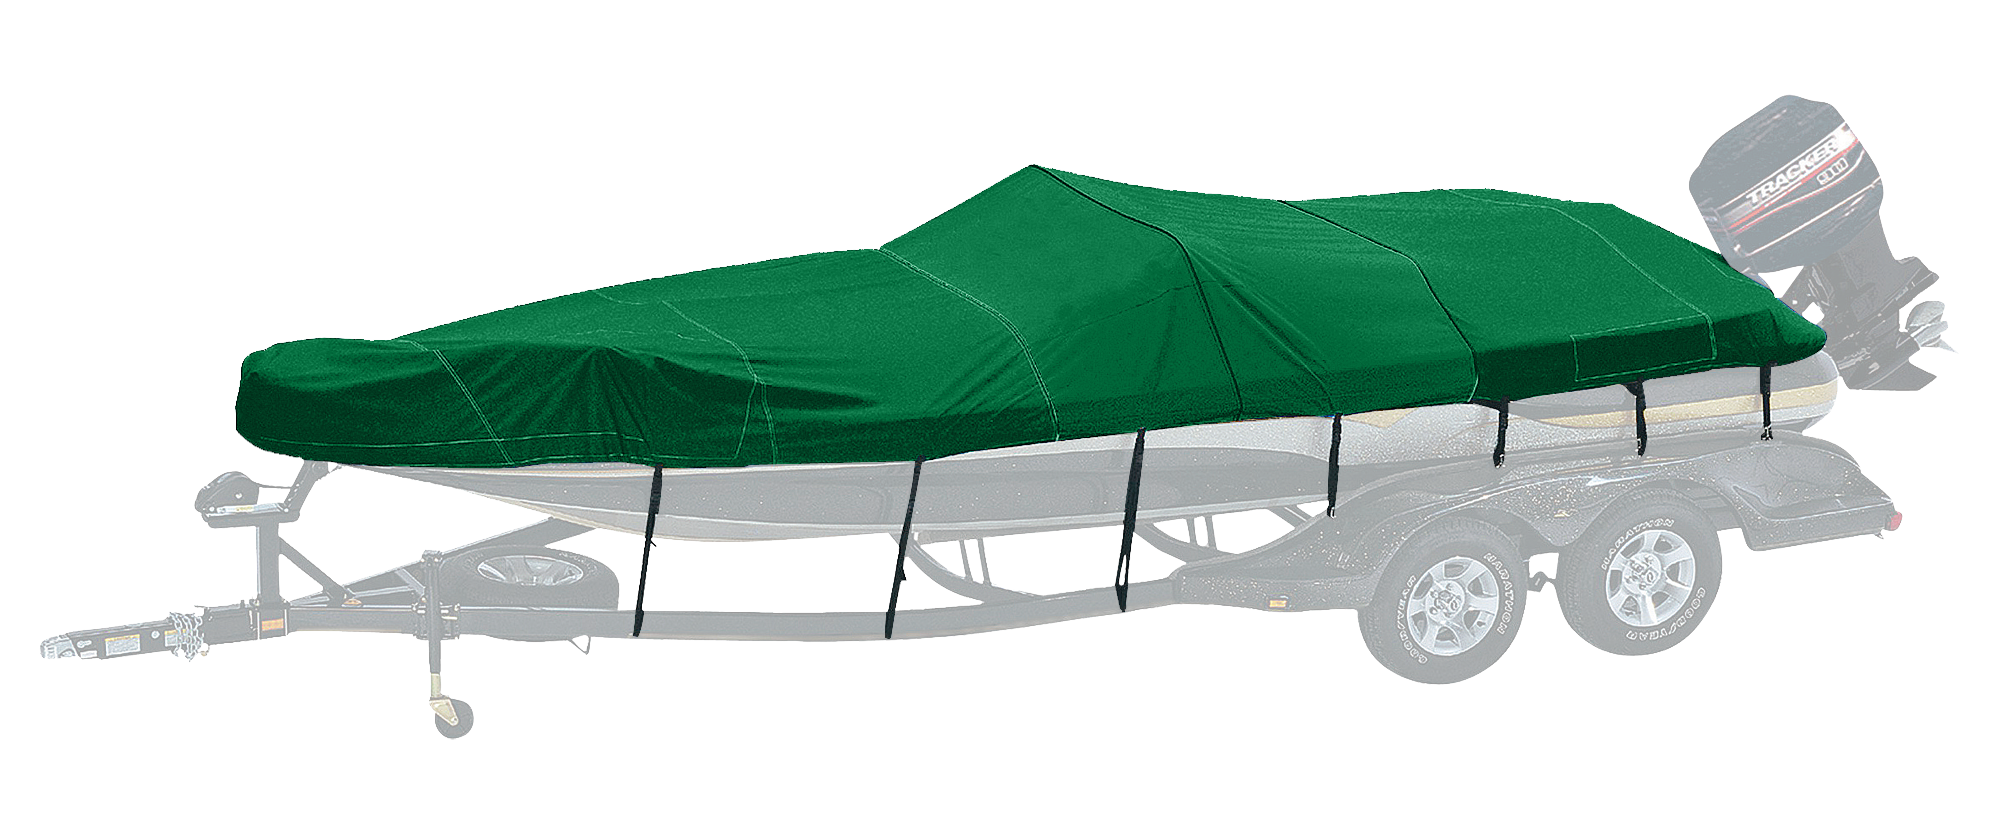 Bass Pro Shops Exact Fit Custom Boat Cover by Westland for TRACKER Models - 2002-03 Super Guide V-16 SC - Forest Green